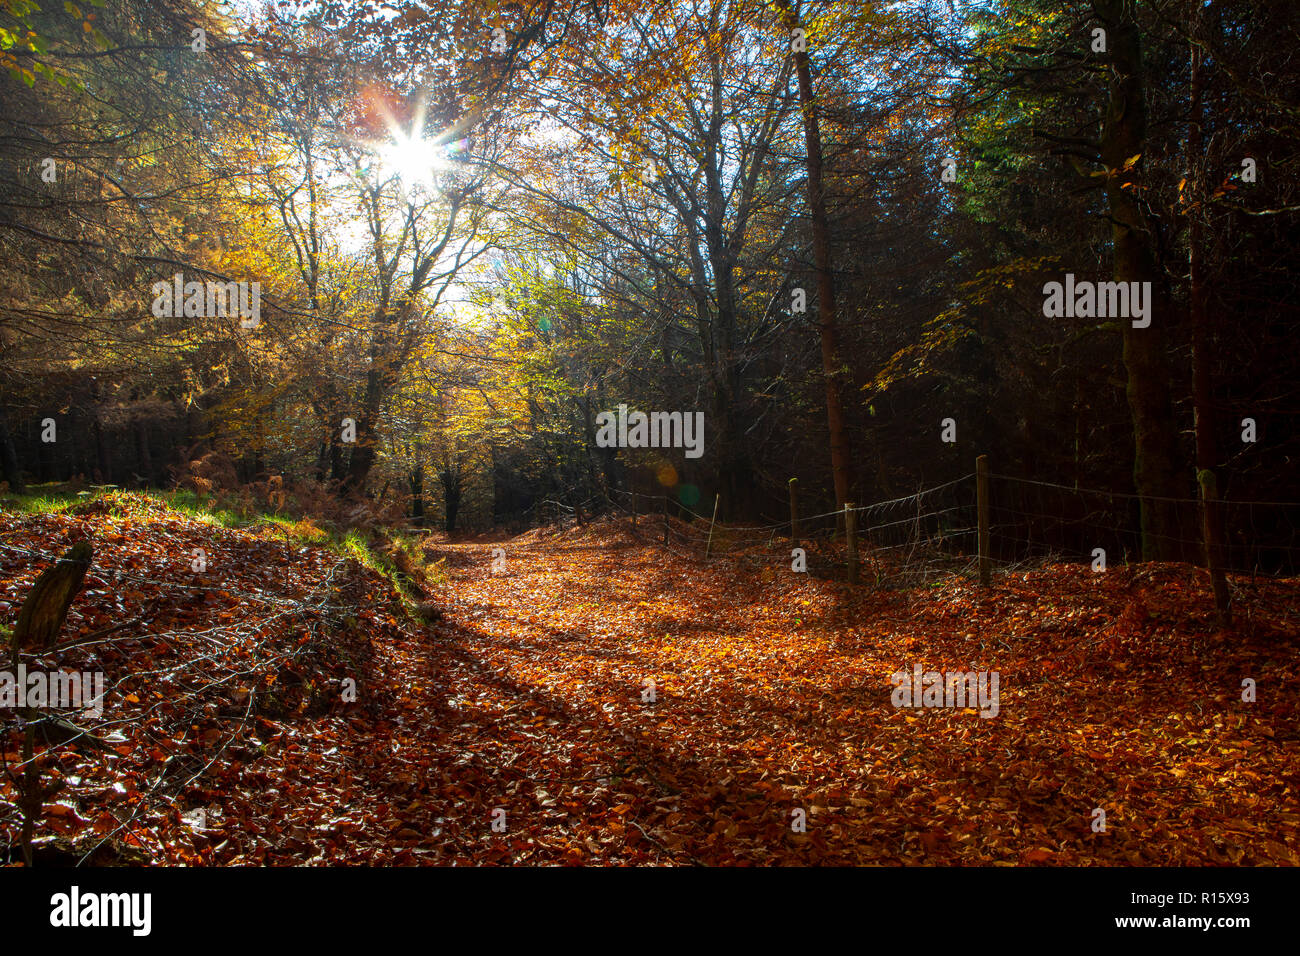 Scenic road in autumn Banque D'Images